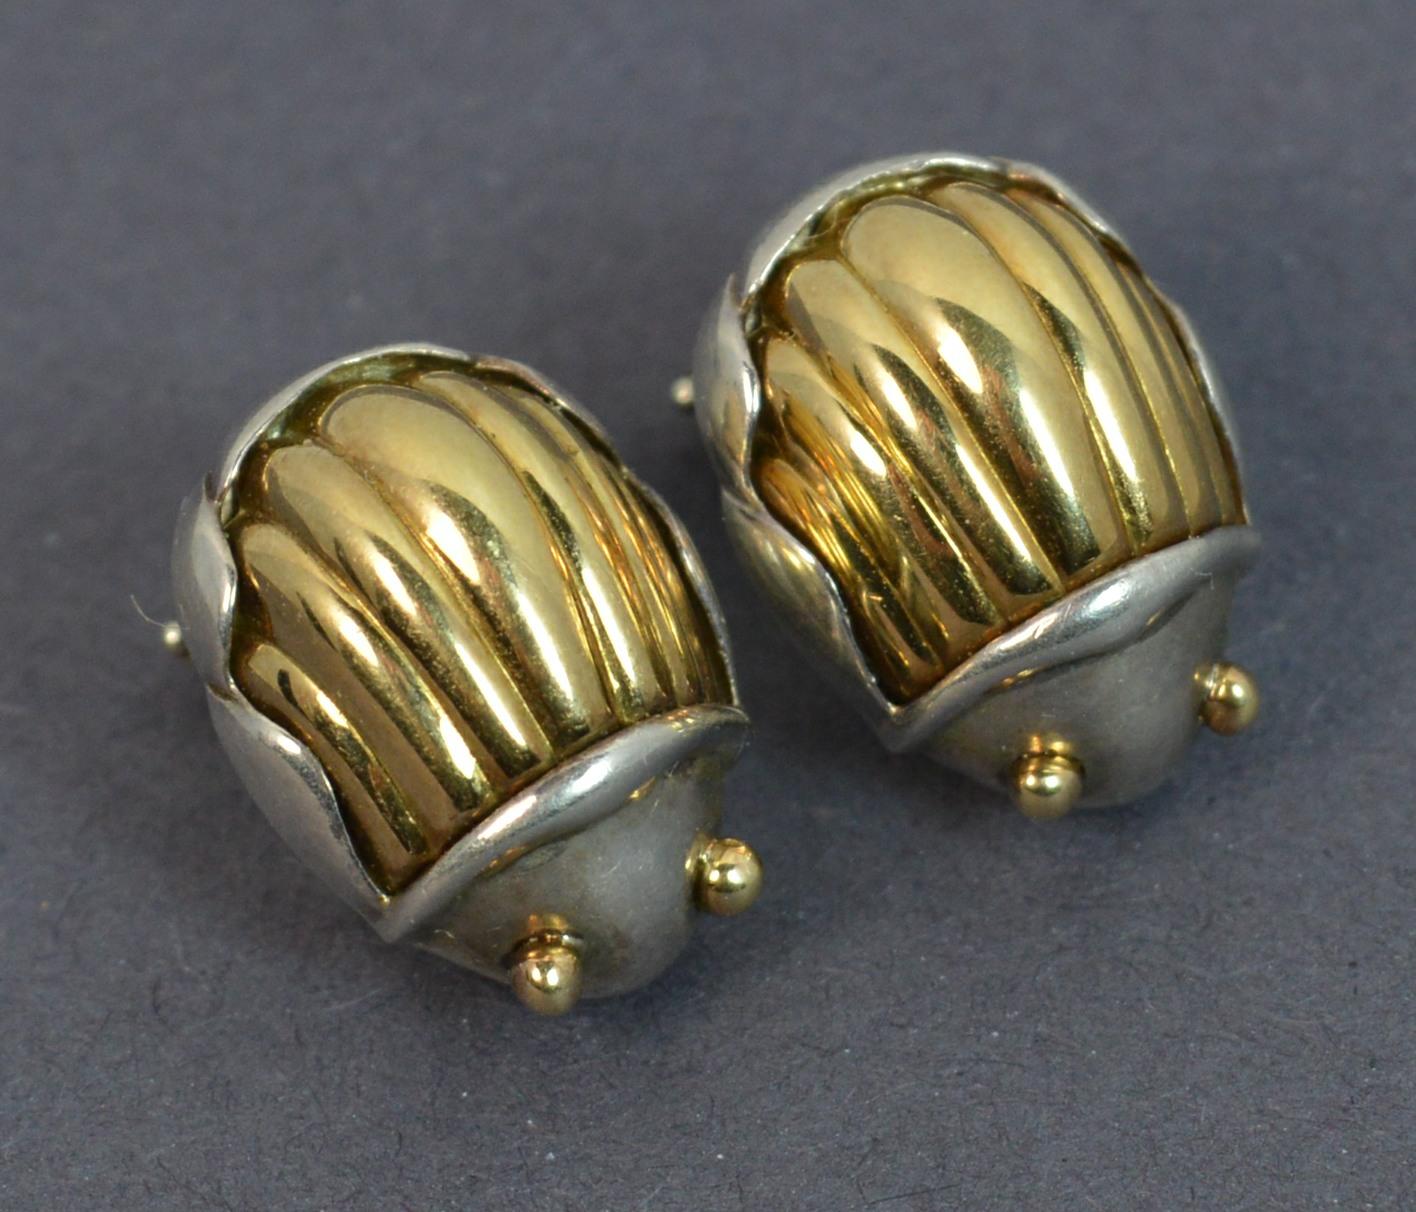 A beautiful vintage pair of earrings.
Designed by TIFFANY & CO.
Sterling silver example with 18 carat yellow gold front.
Scarab beetle design to each.
Hallmarks ; c1993, Tiffany & Co, 925 750
Weight ; 6.4 grams
Size ; 16mm x 11mm beetle,
Condition ;